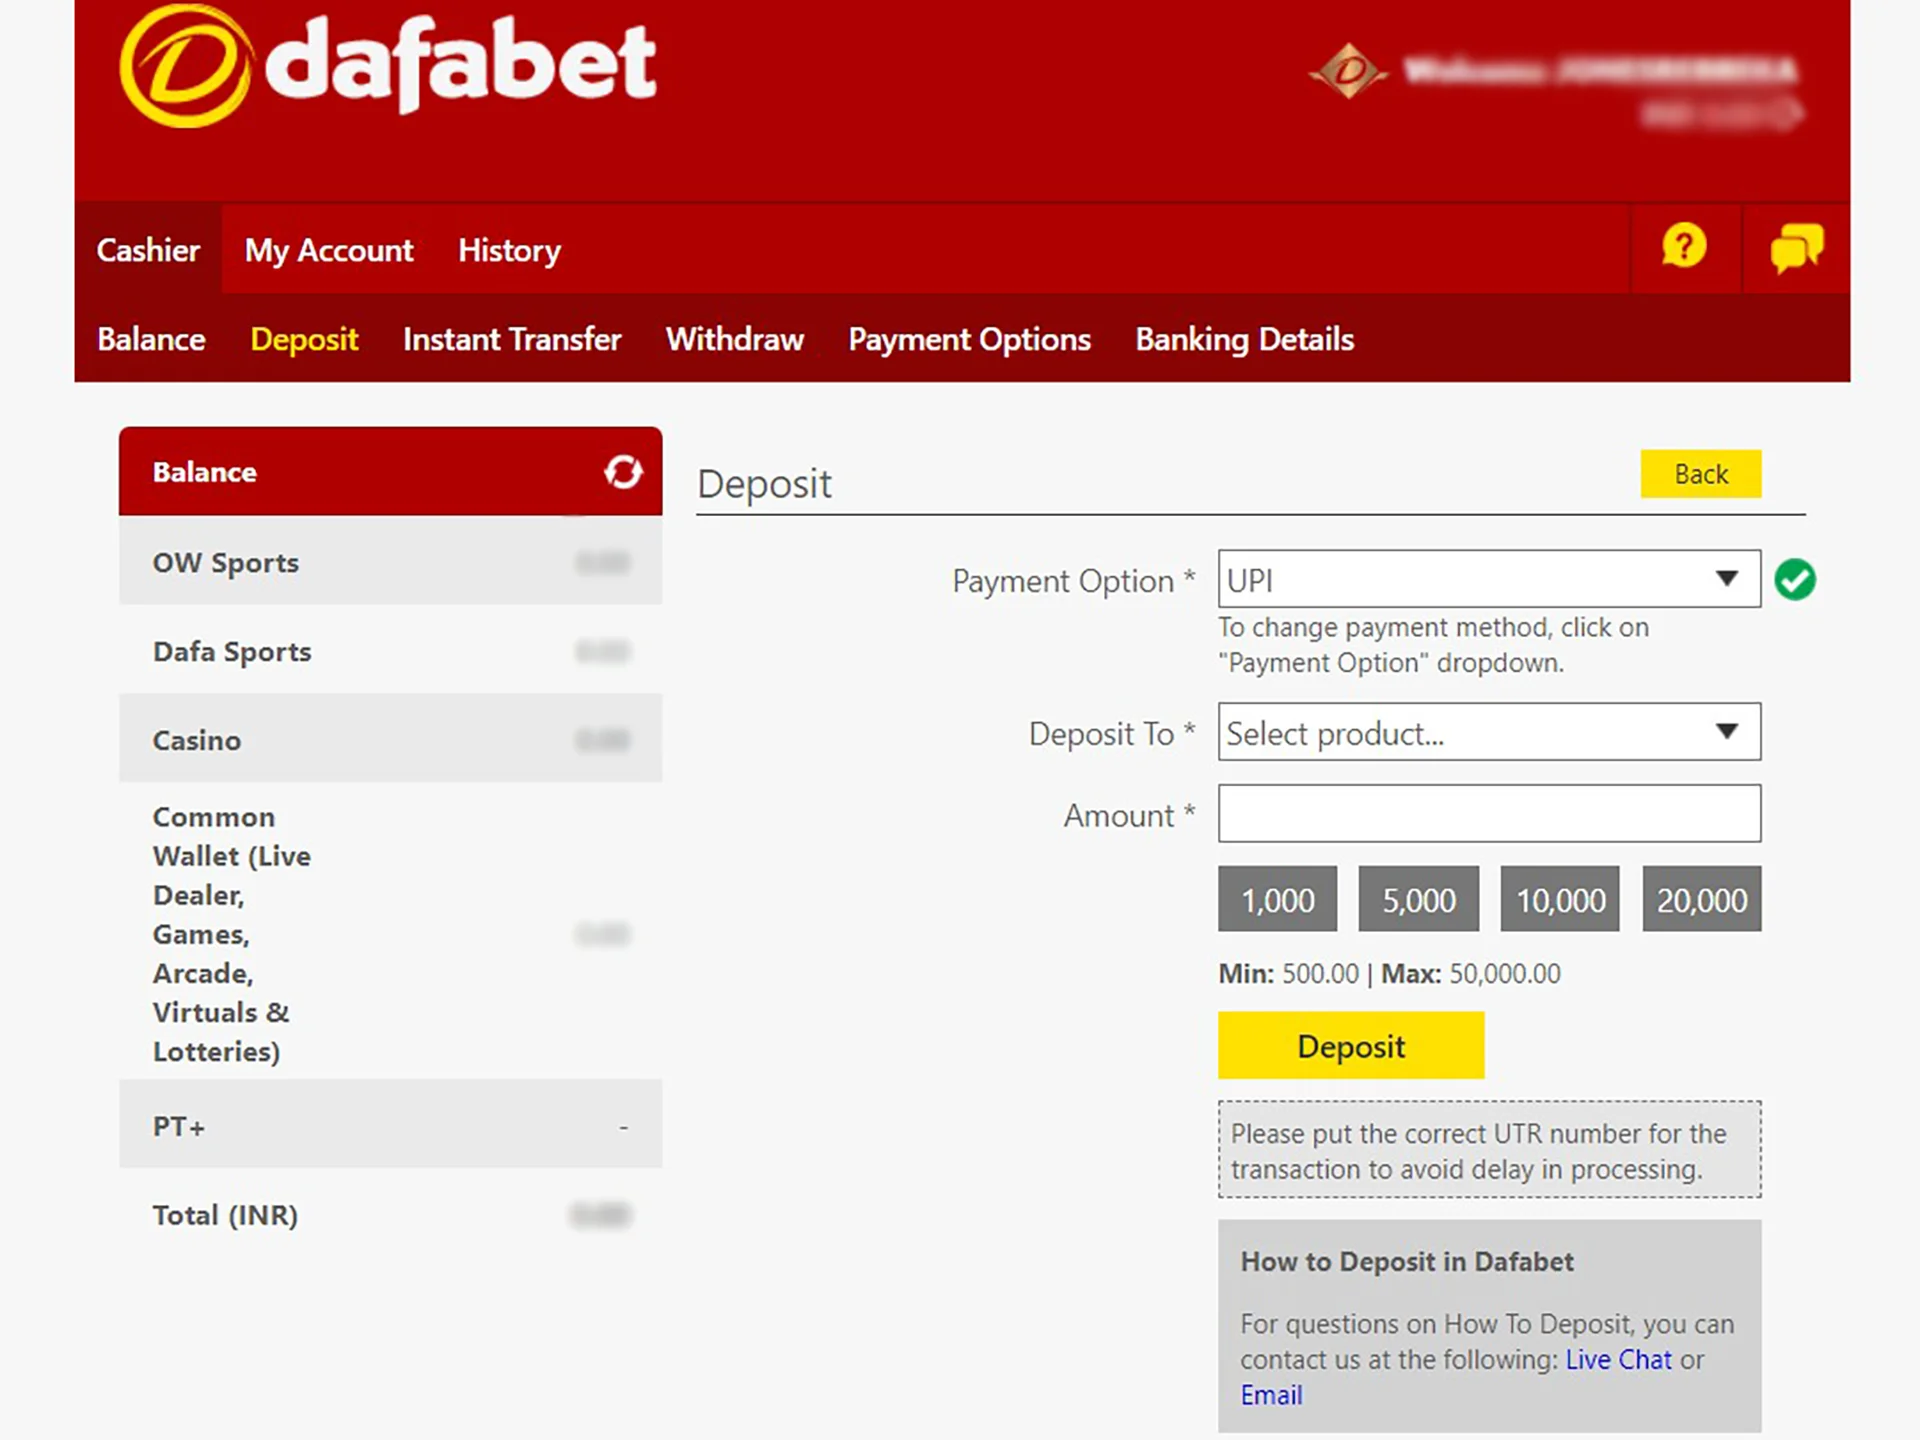 To place bets, top up your Dafabet account balance.